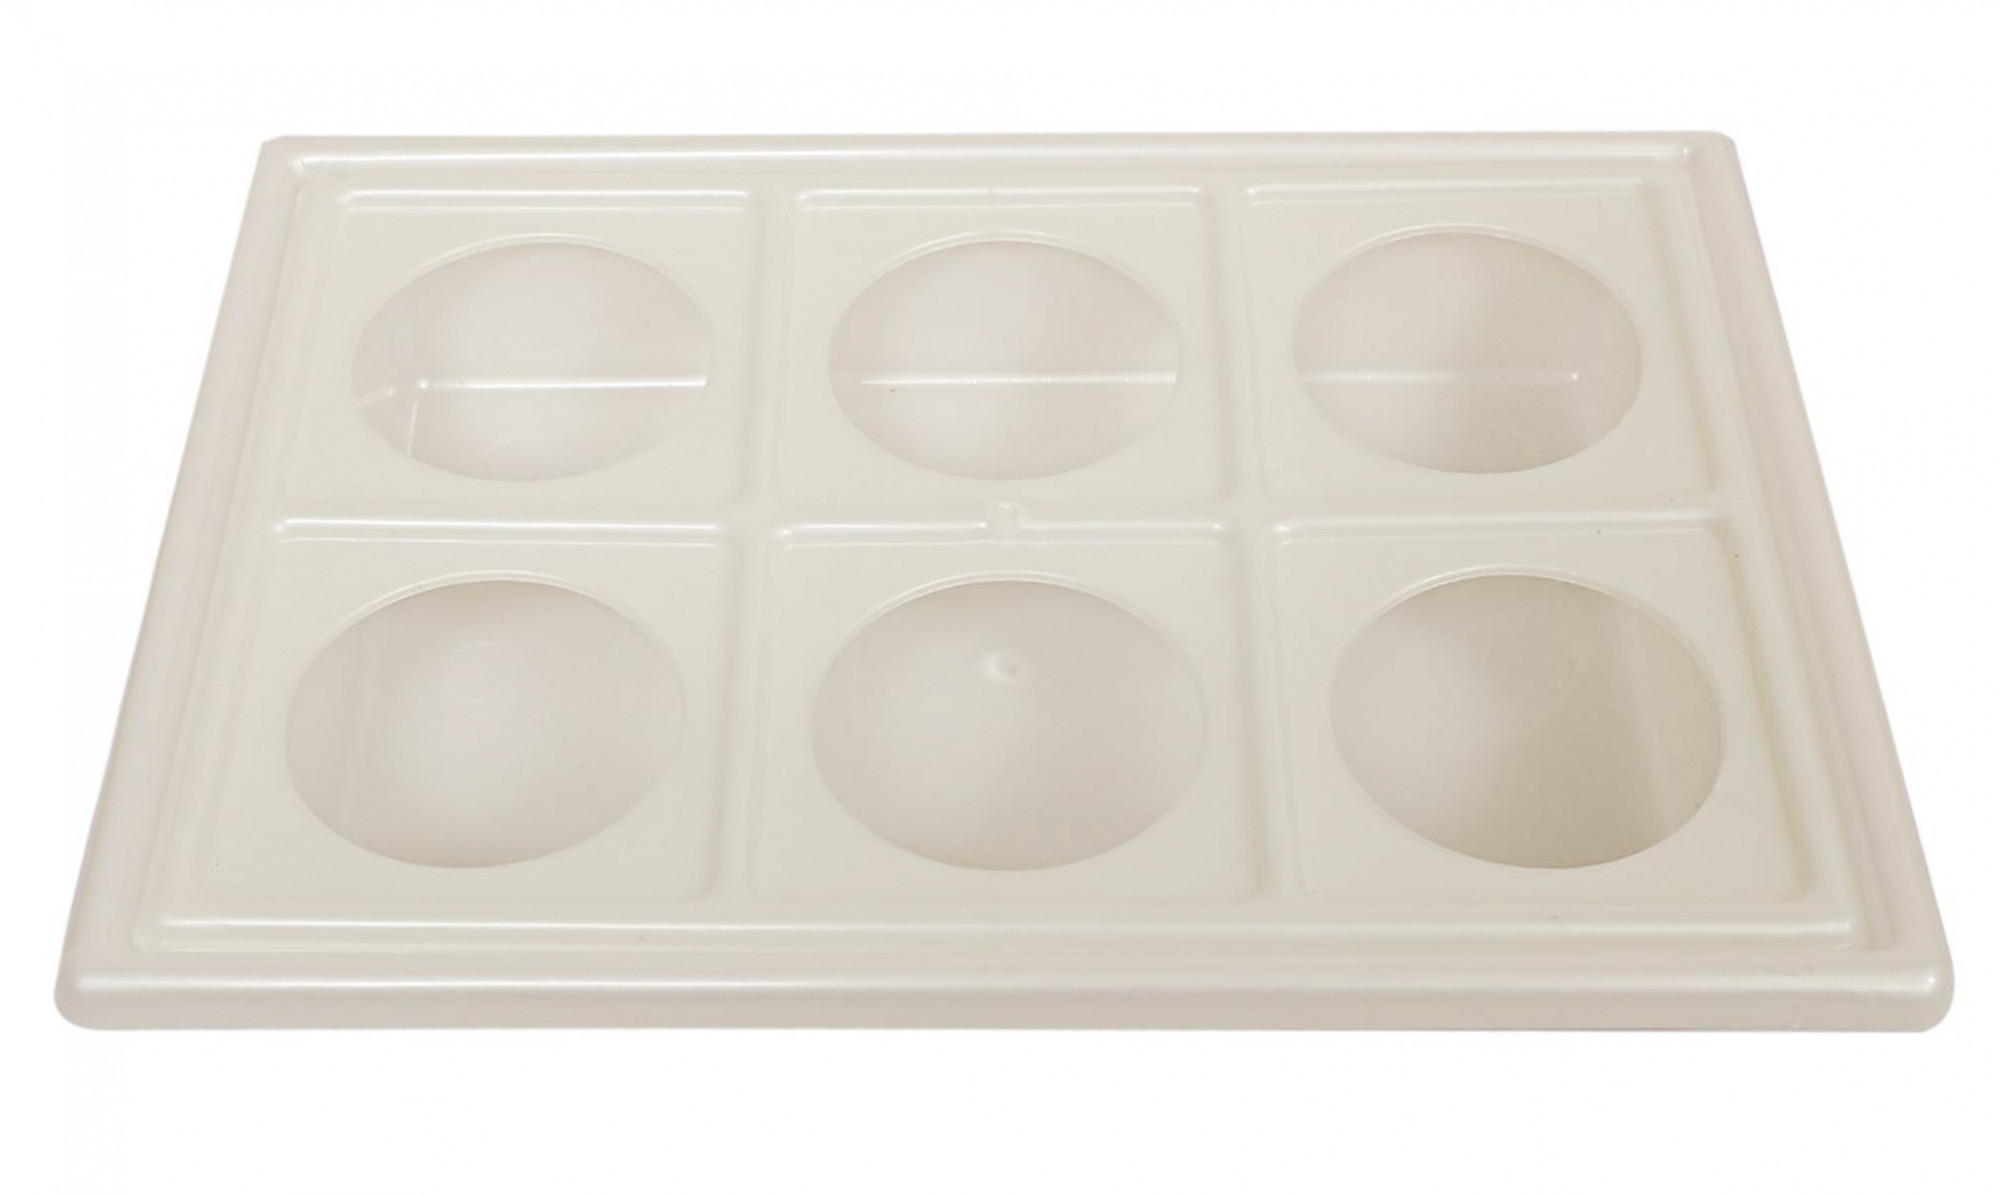 Kuber Industries Tray with Cutout Handles, Cup Display for Kitchenware, Plastic Glass Holder, One Size, 6 Slots (White)